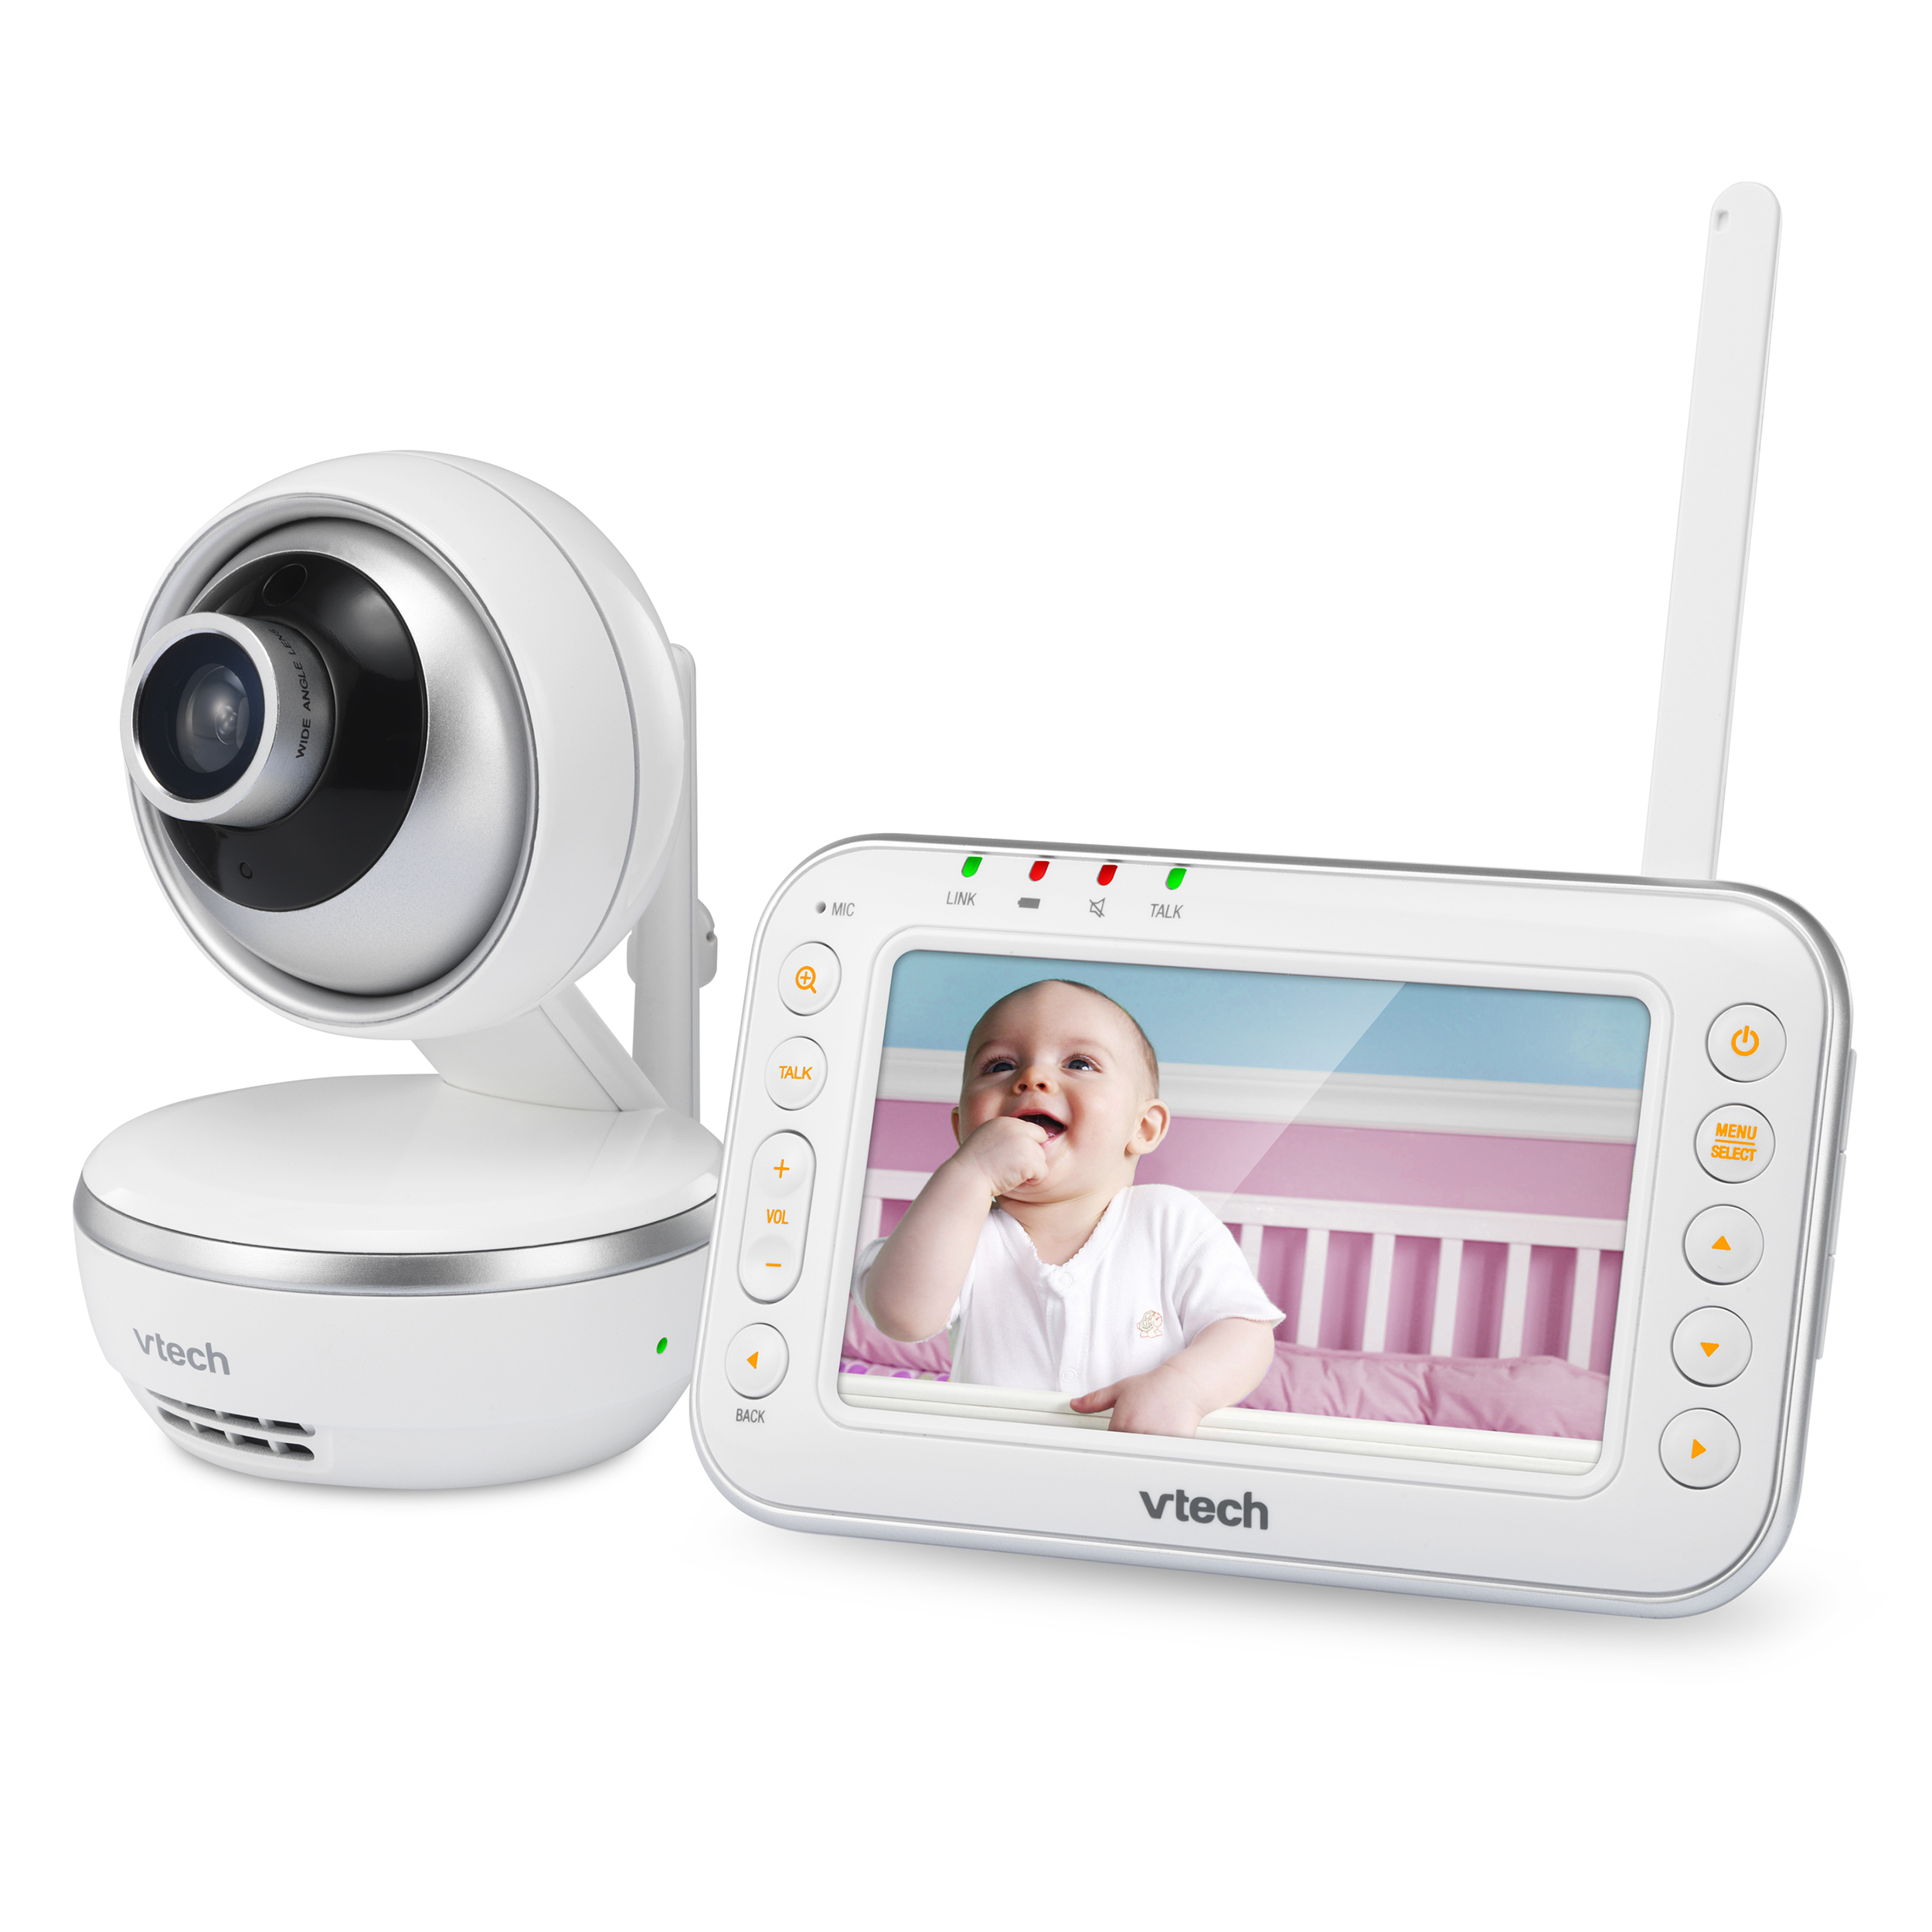 VTech VM4261, 4.3" Digital Video Baby Monitor with Pan & Tilt Camera, Wide-Angle Lens and Standard Lens, White - image 3 of 13